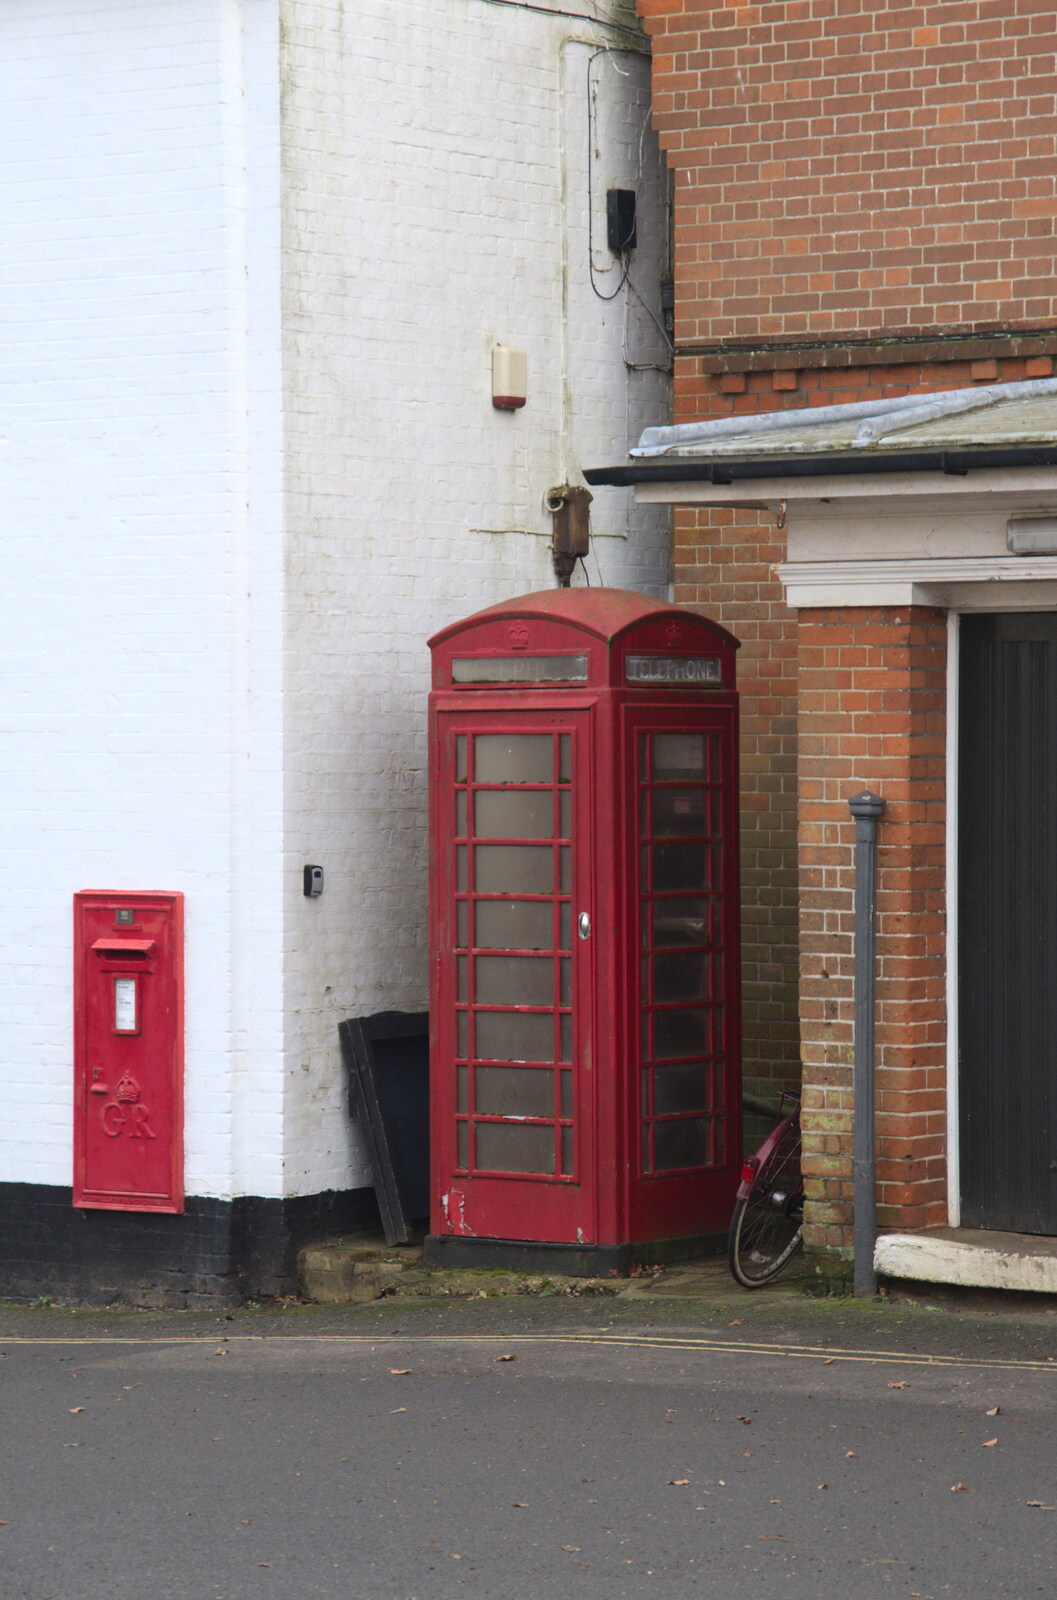 A Trip to Orford, Suffolk - 25th January 2020: A K6 phone box